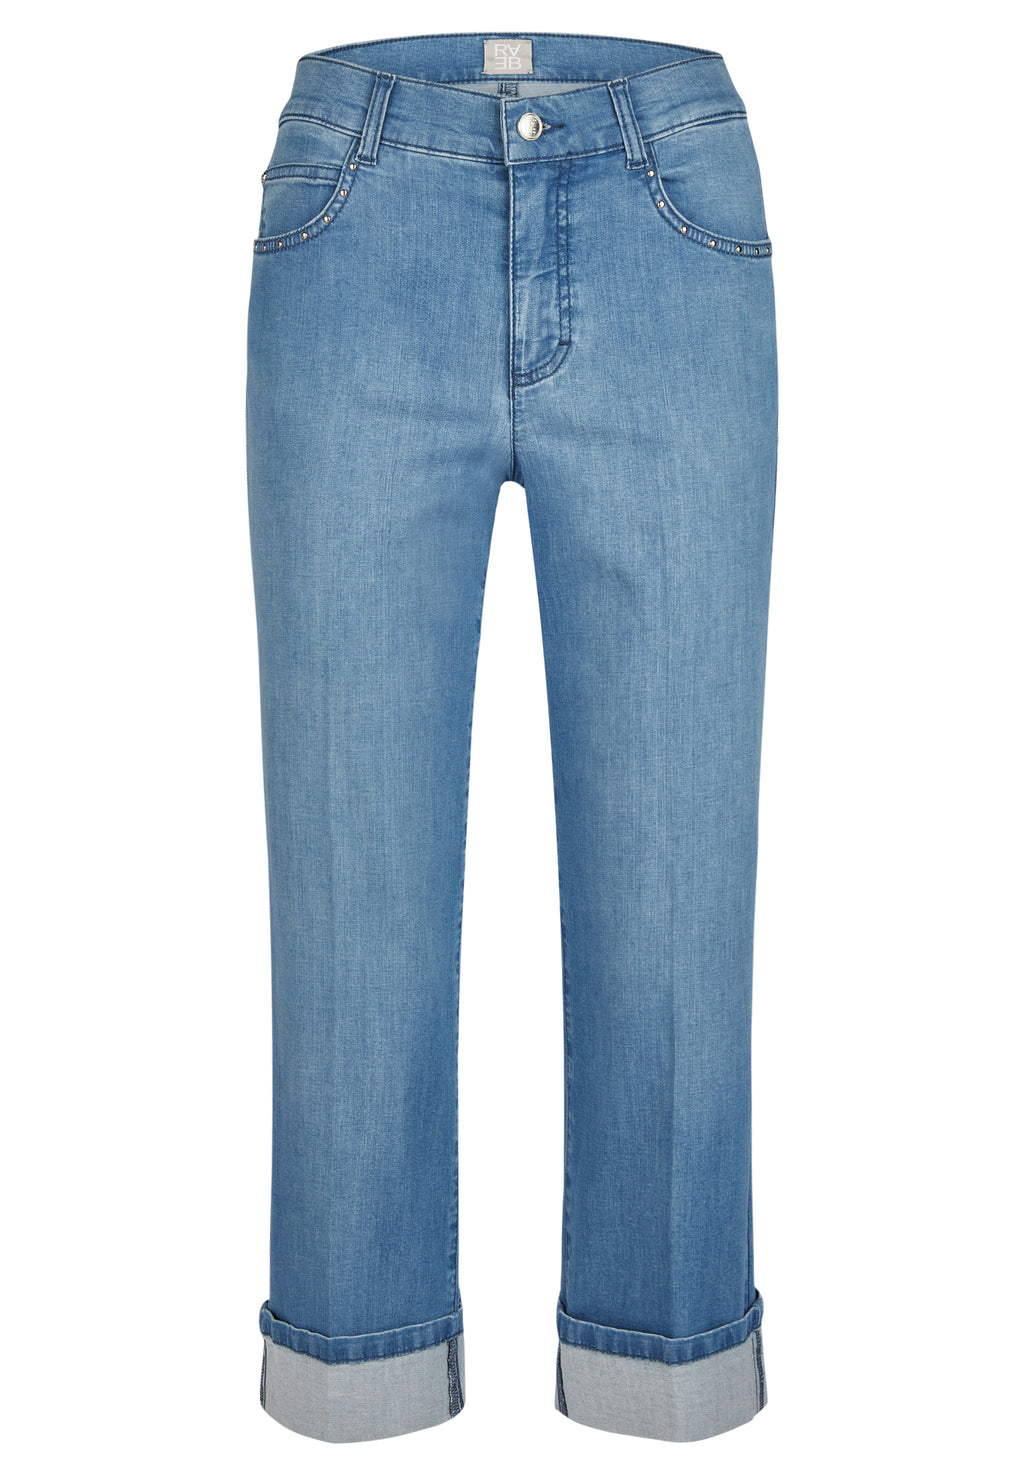 Rabe willow turn up jeans in light denim, product code 52-213151